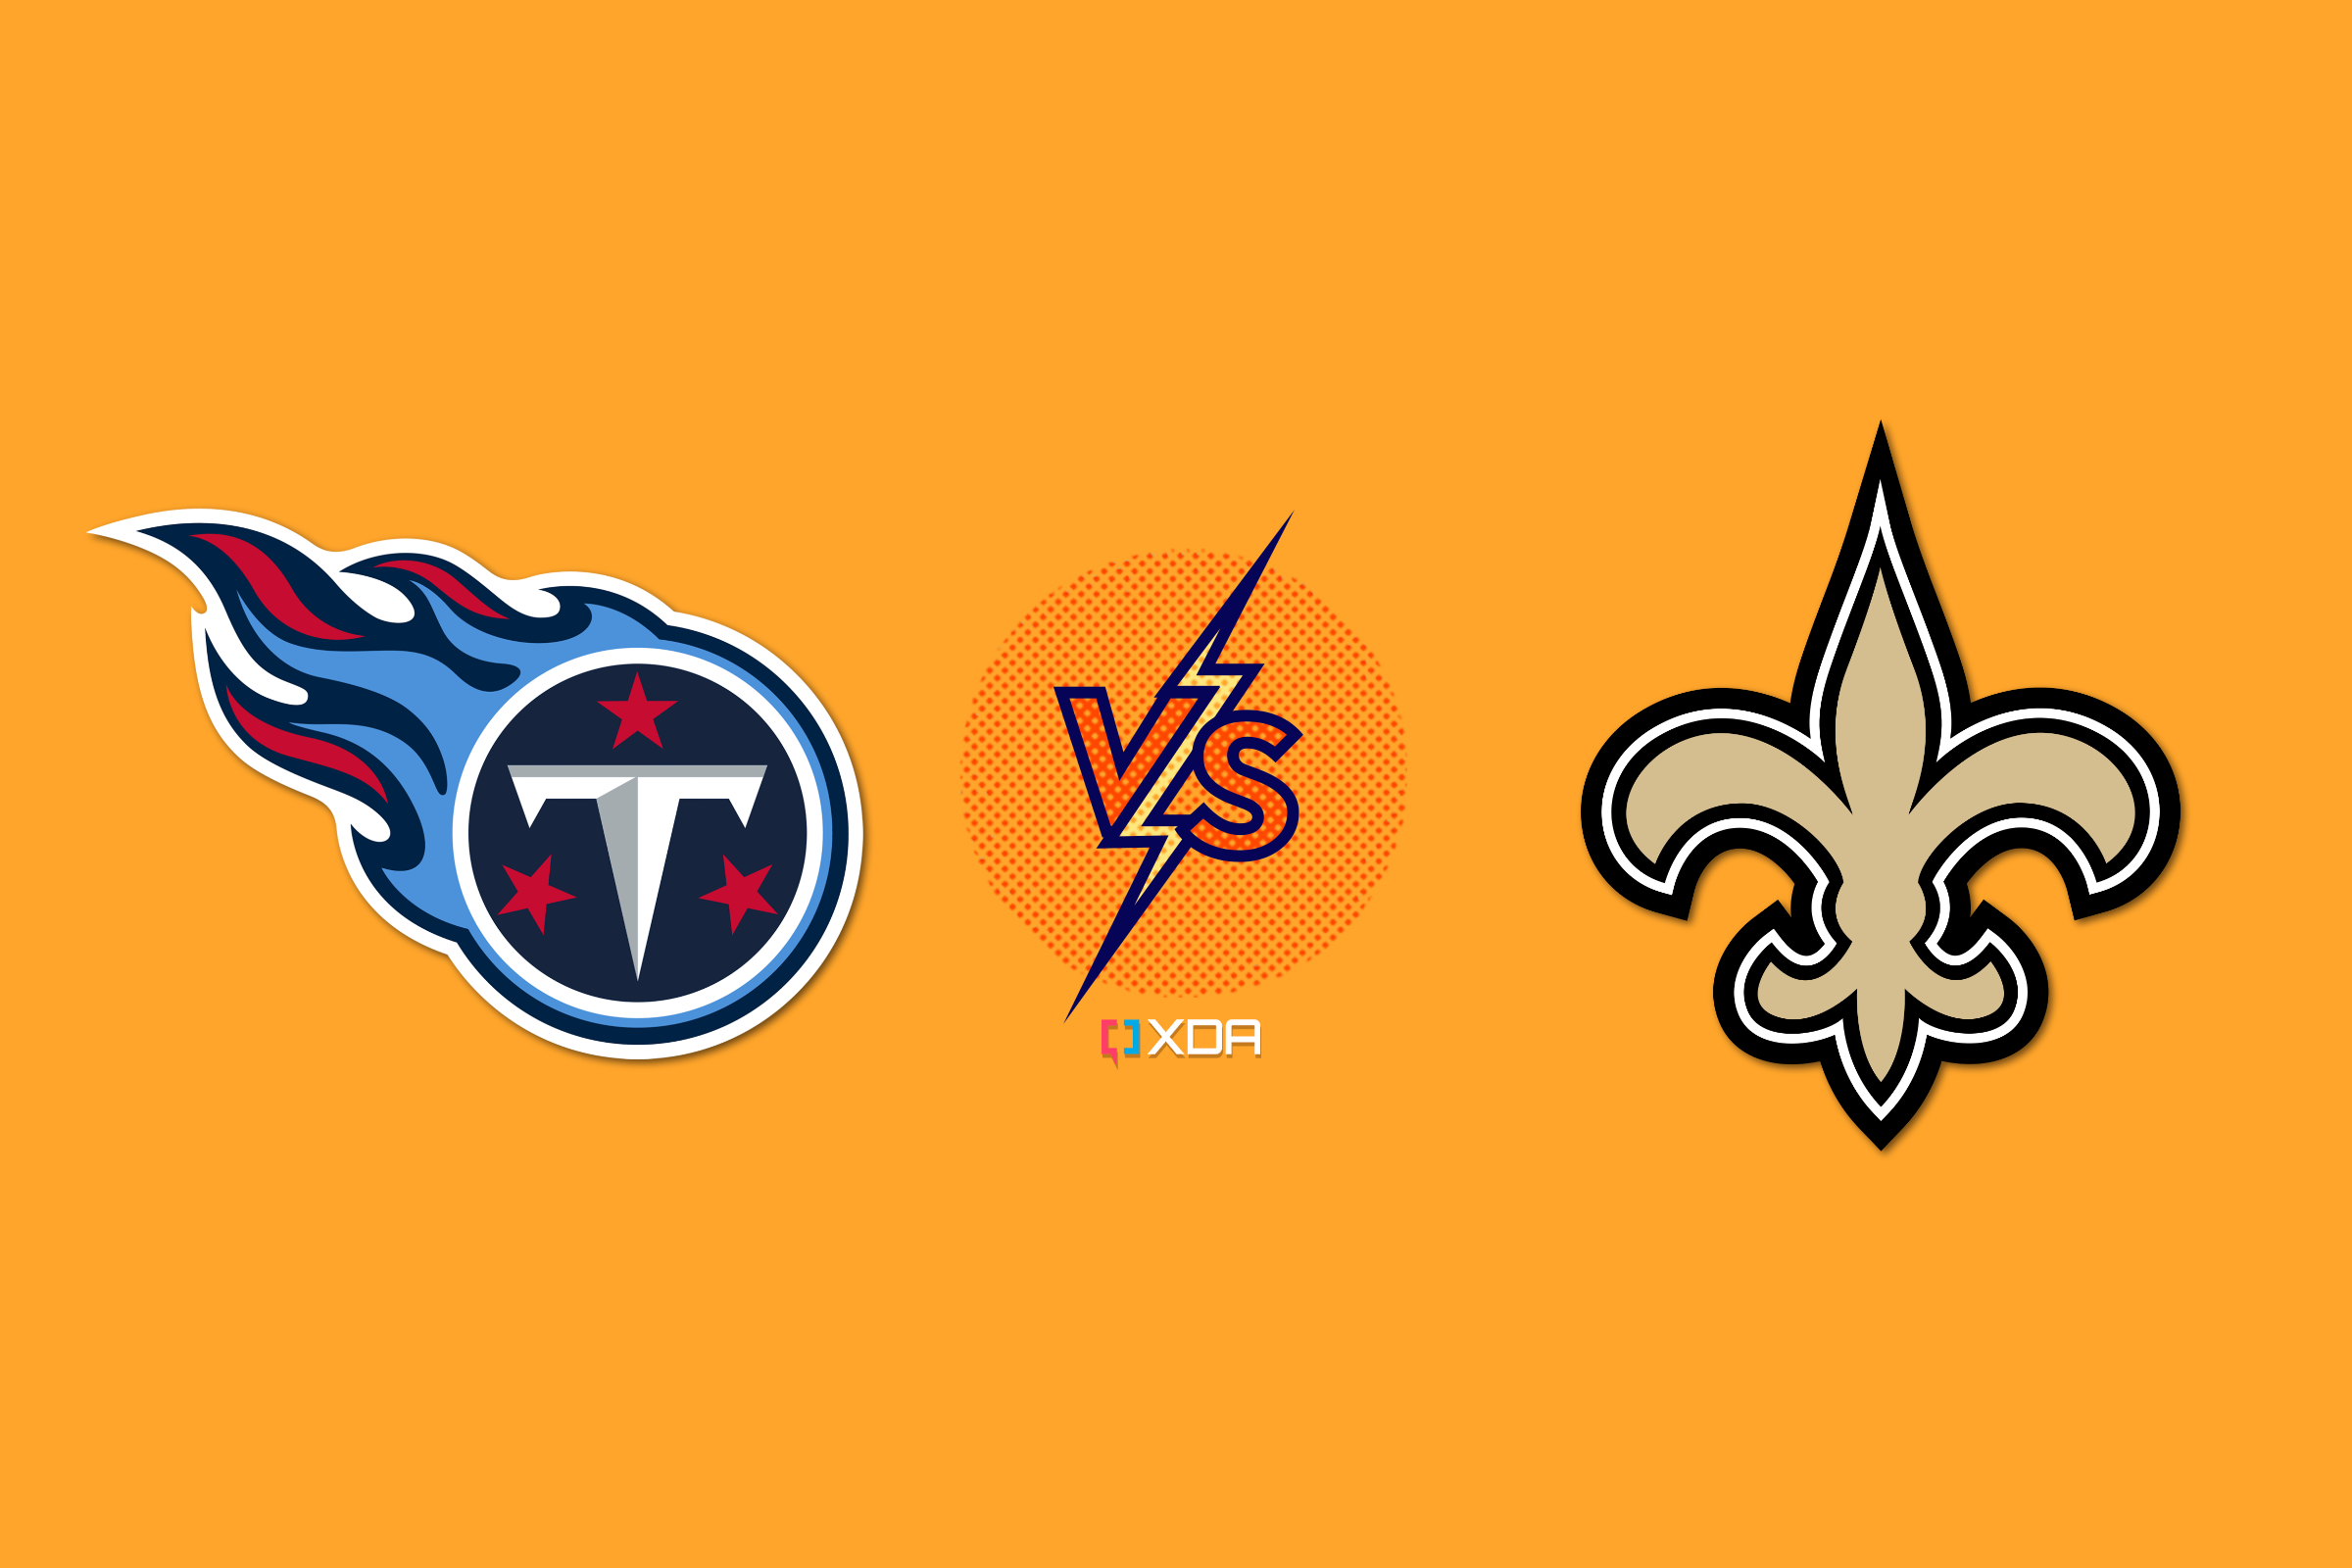 How To watch Titans vs Saints: Start time, live stream, and more